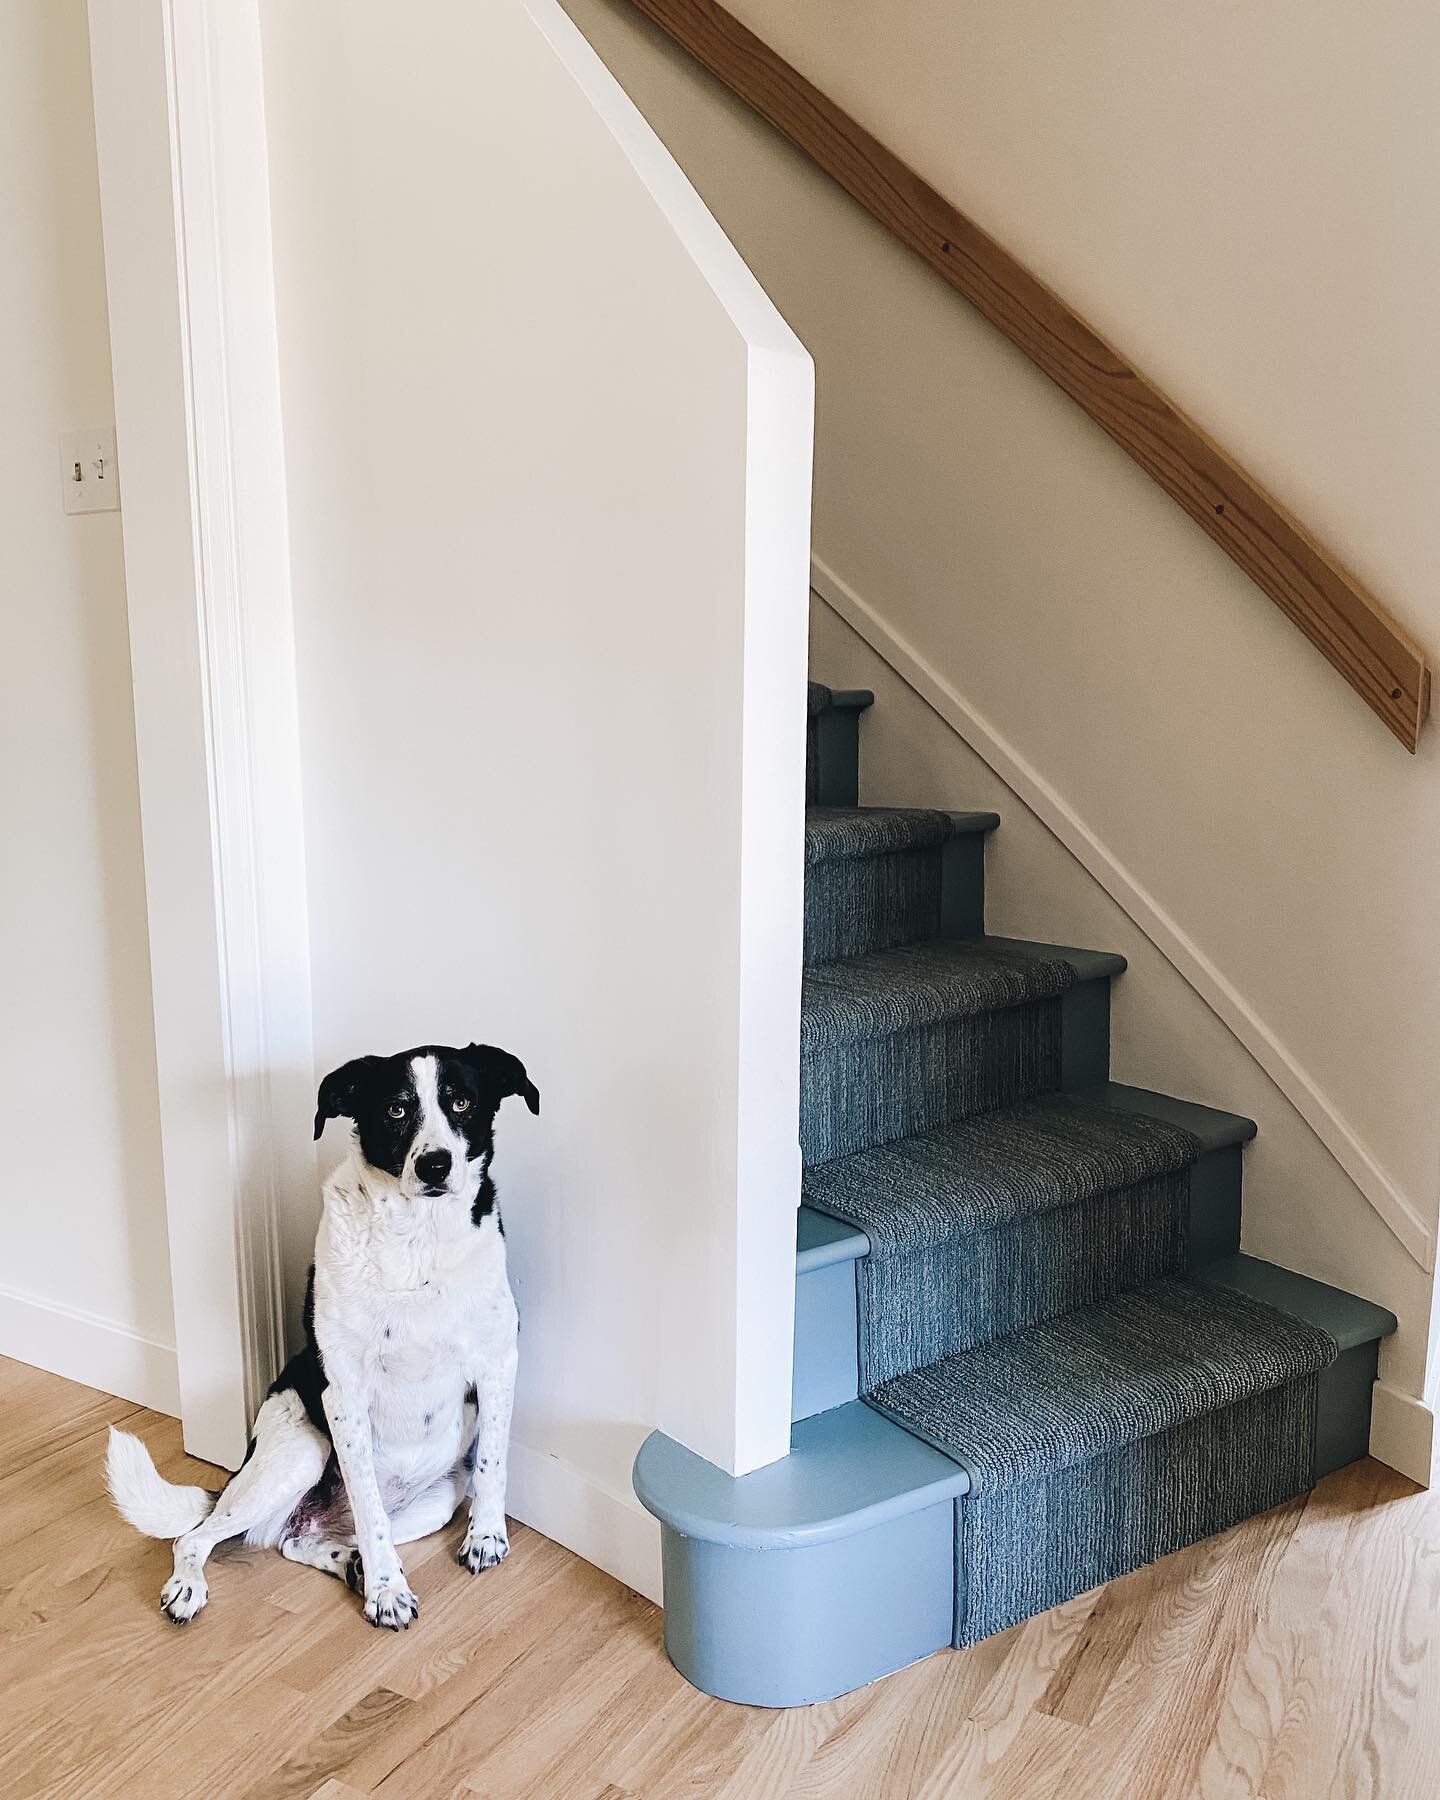 A #beforeandafterhome of our staircase. Upgraded everything, even the dog 😉. Took out the wrought iron and dry walled a new half wall because it was the most economical. We also moved the handrail (and custom made a new one) to the other side since 